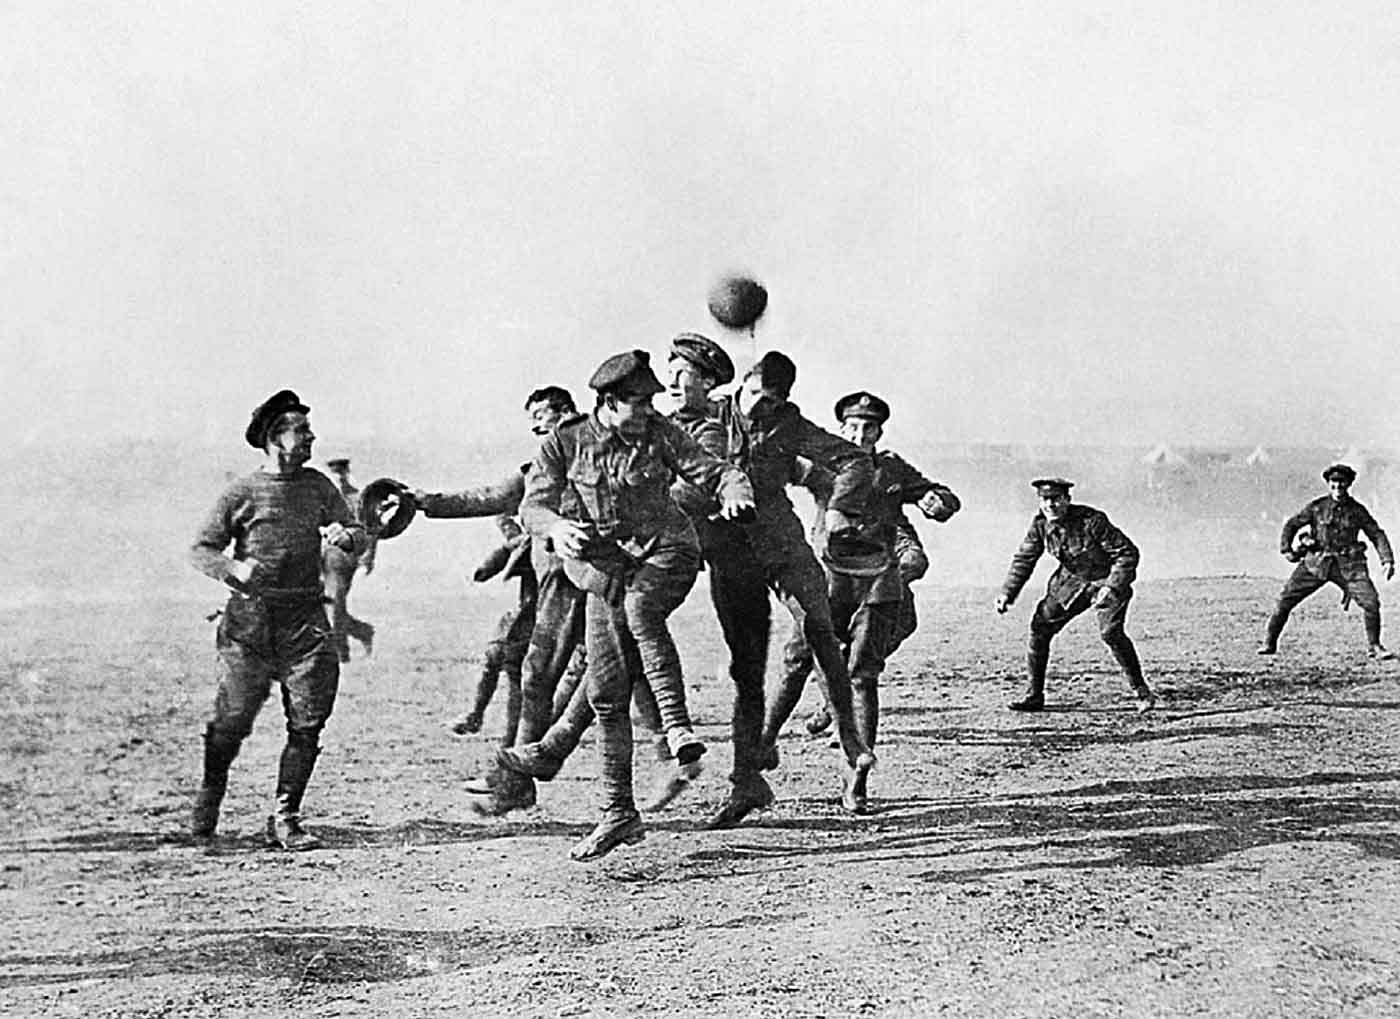 Christmas truces were “common” in the First World War